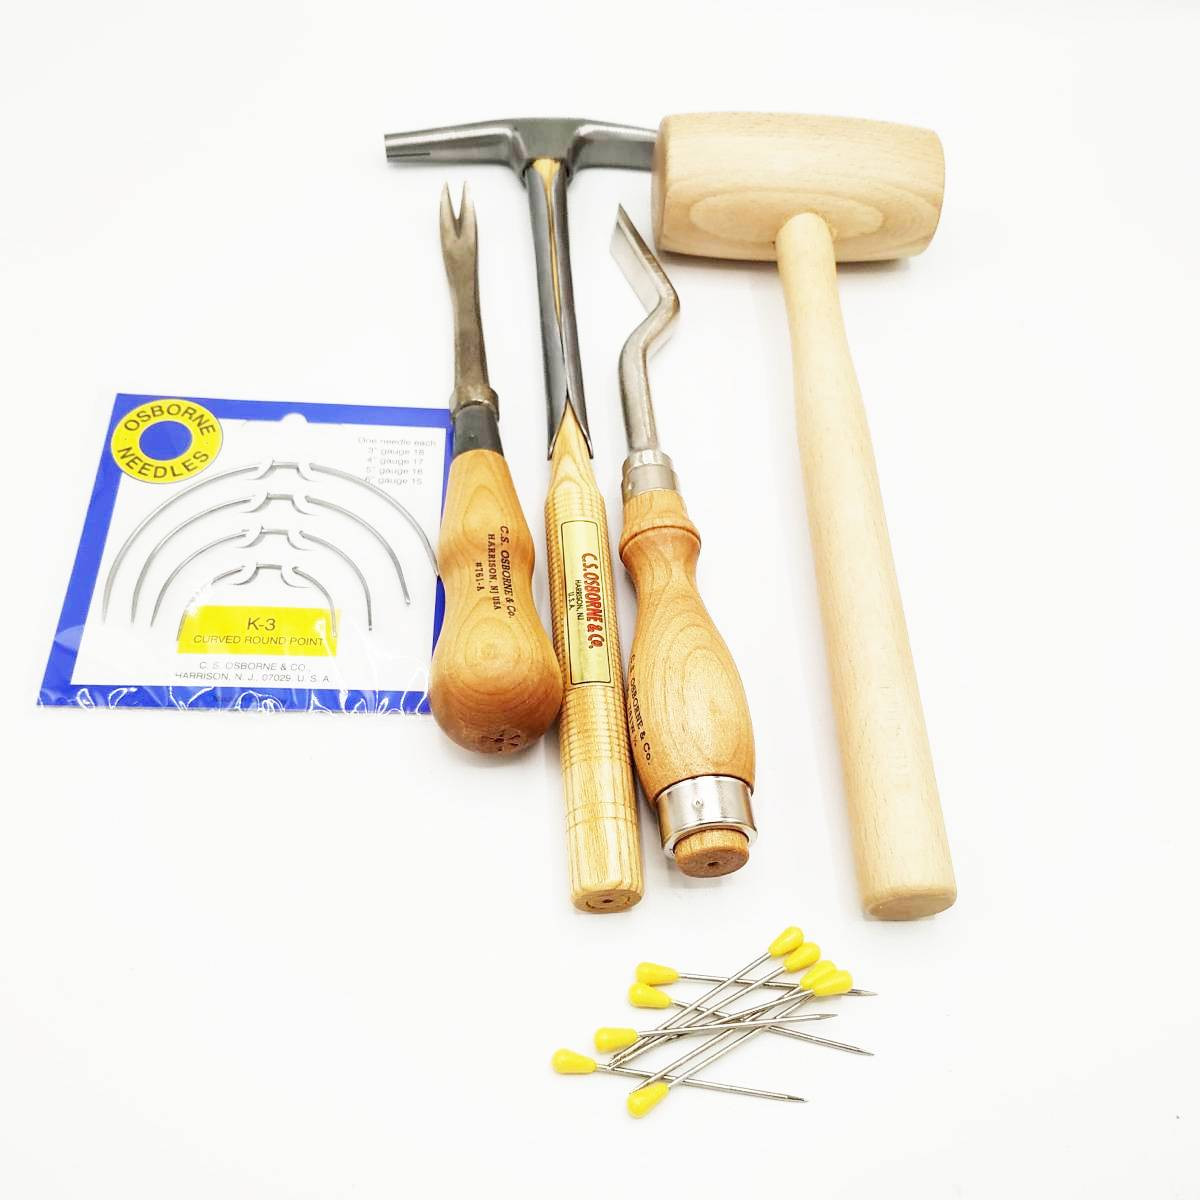 Kit Outils Tapissiers 5